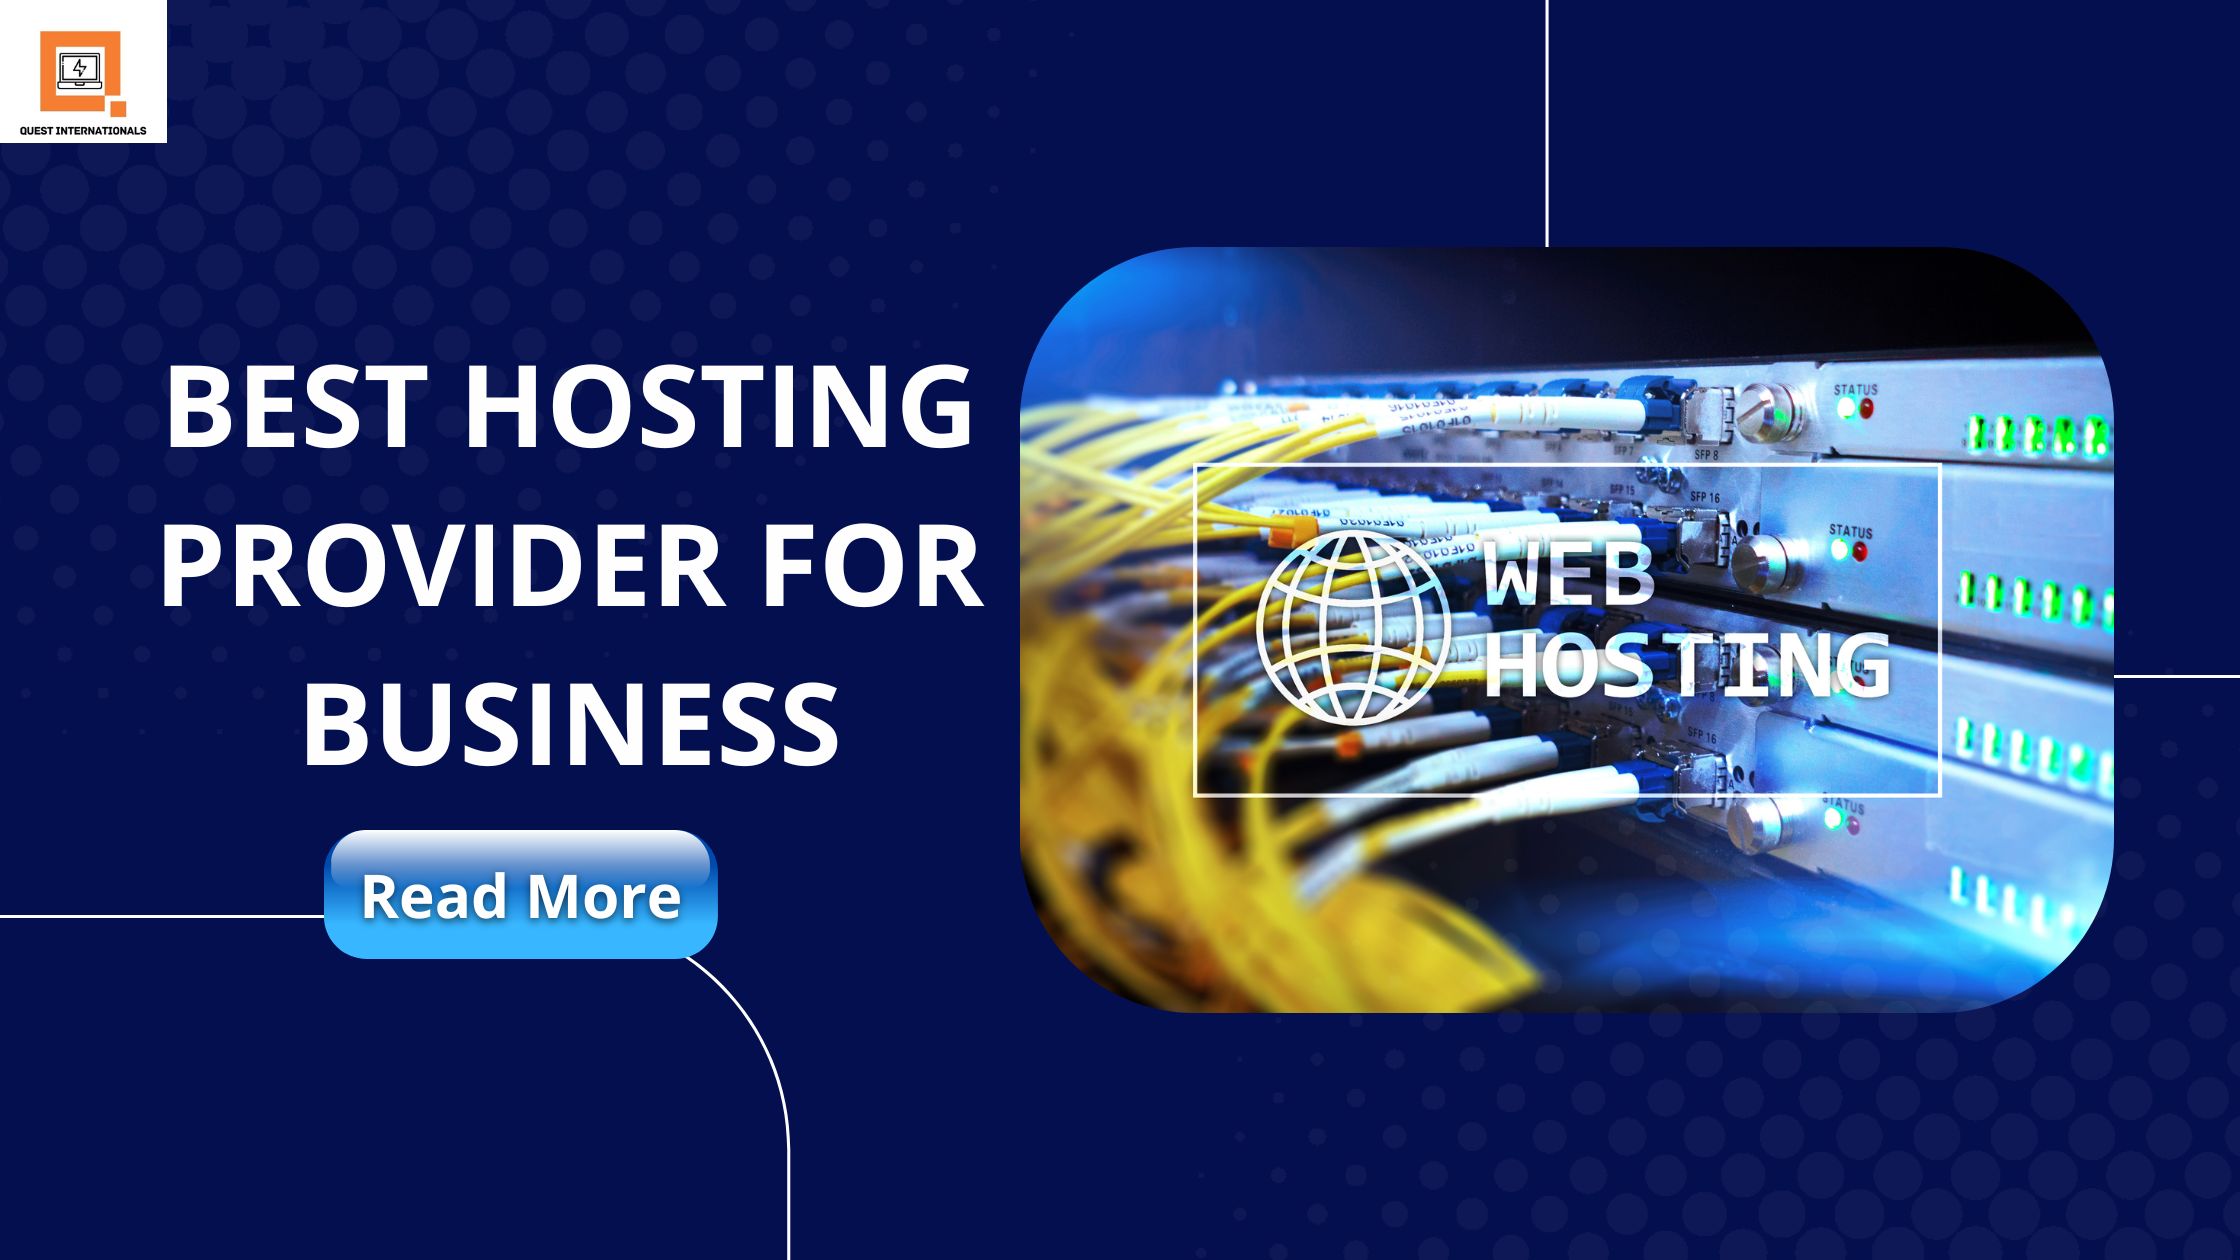 You are currently viewing BEST HOSTING PROVIDER FOR BUSINESS